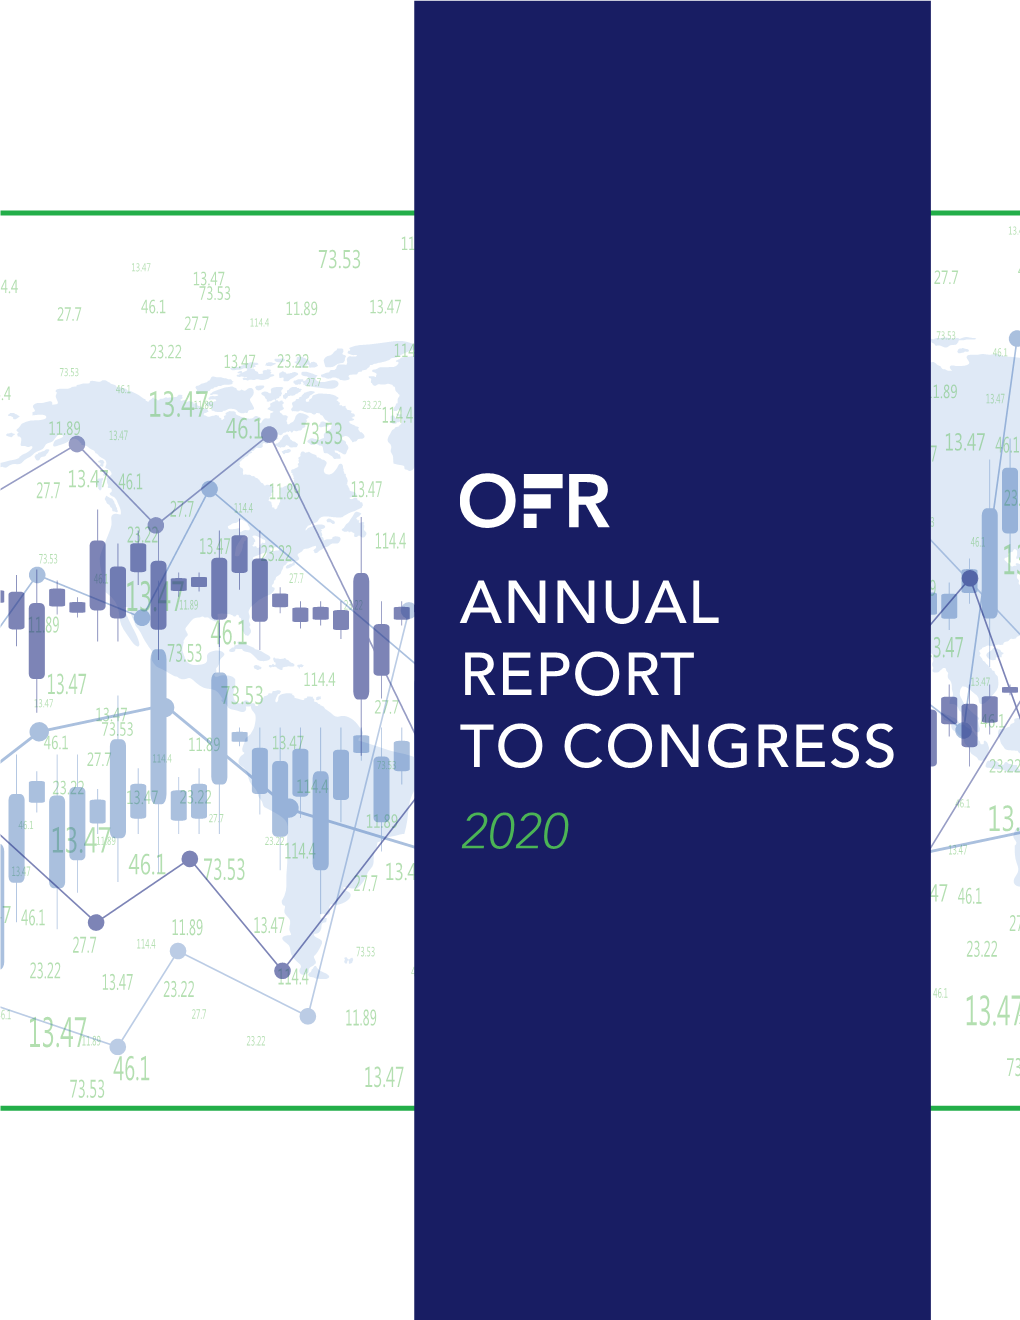 Office of Financial Research's Annual Report to Congress 2020